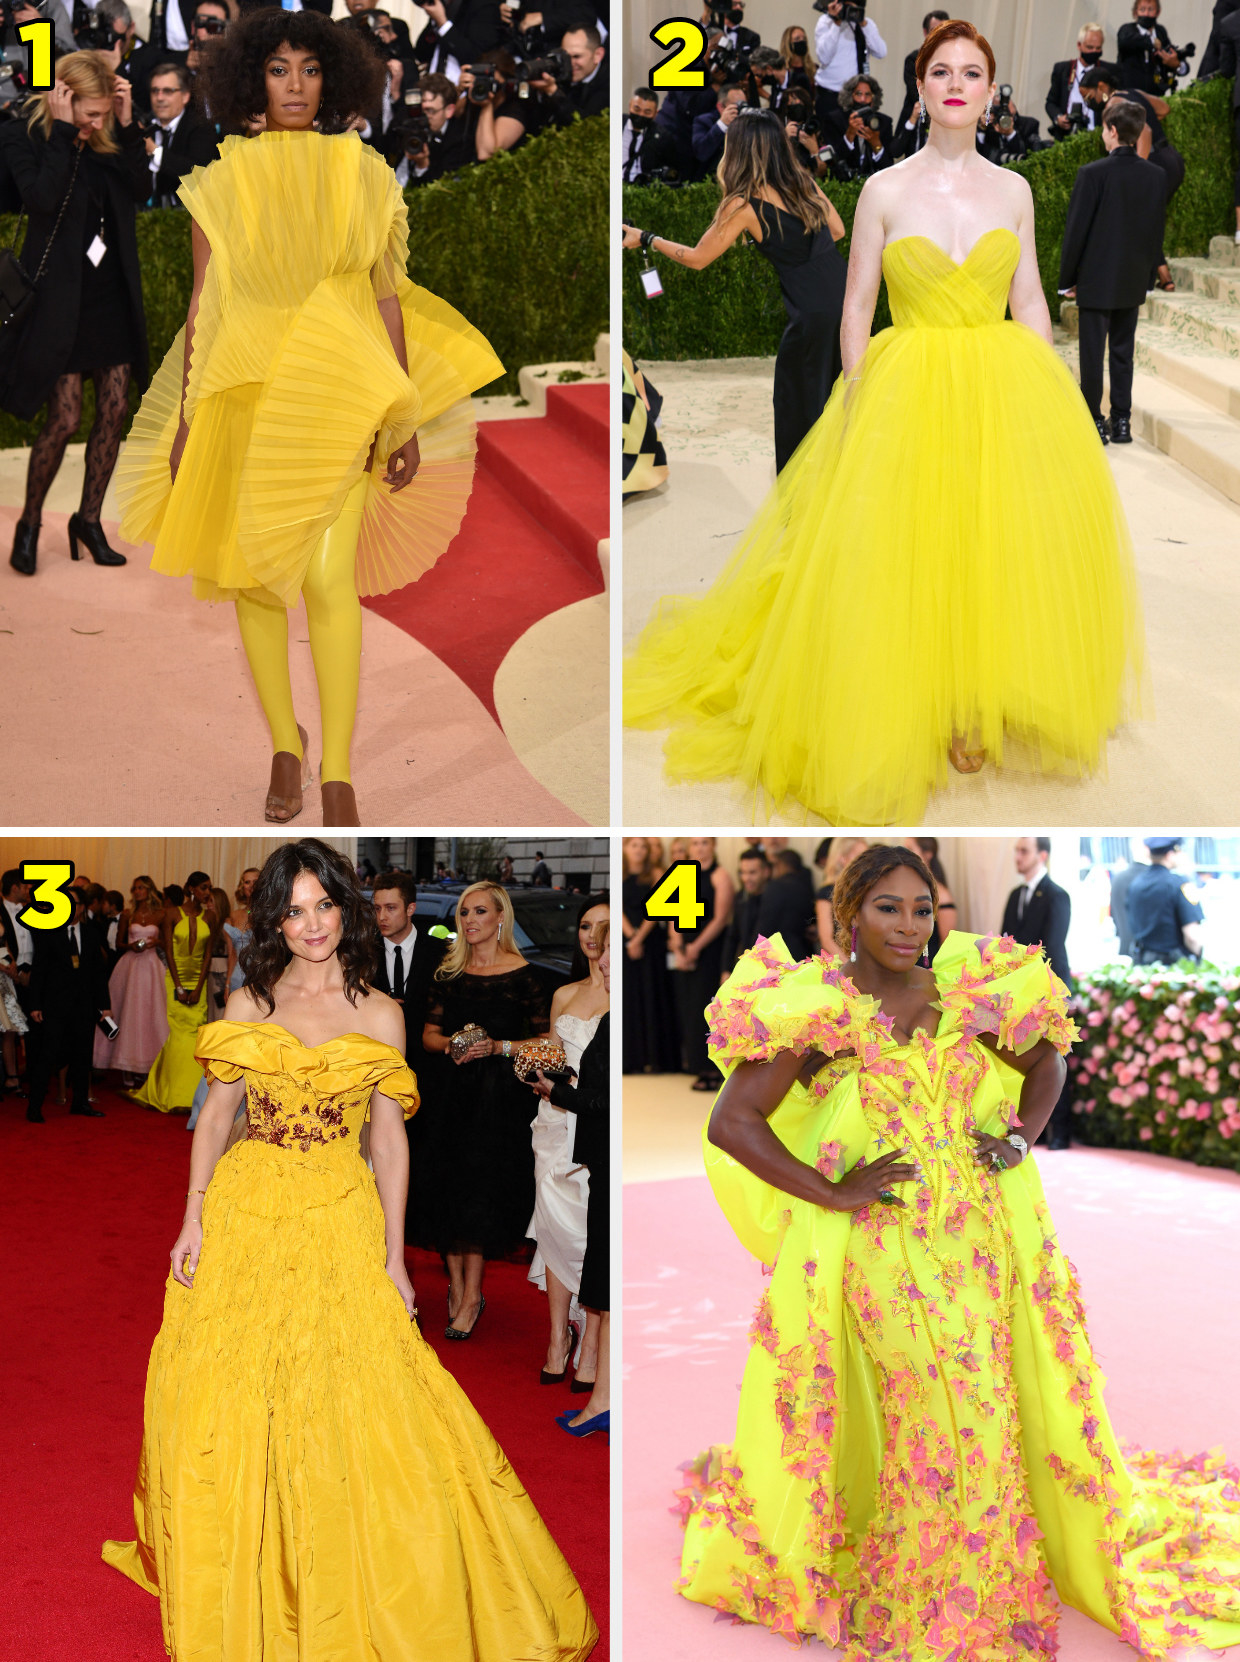 1. Asymmetrical dress with ruffles worn over matching leggings. 2. A chiffon ballgown. 3. Off the shoulder ballgown with ruching on skirt. 4. A gown with shoulder pads and a cape with flower appliques.